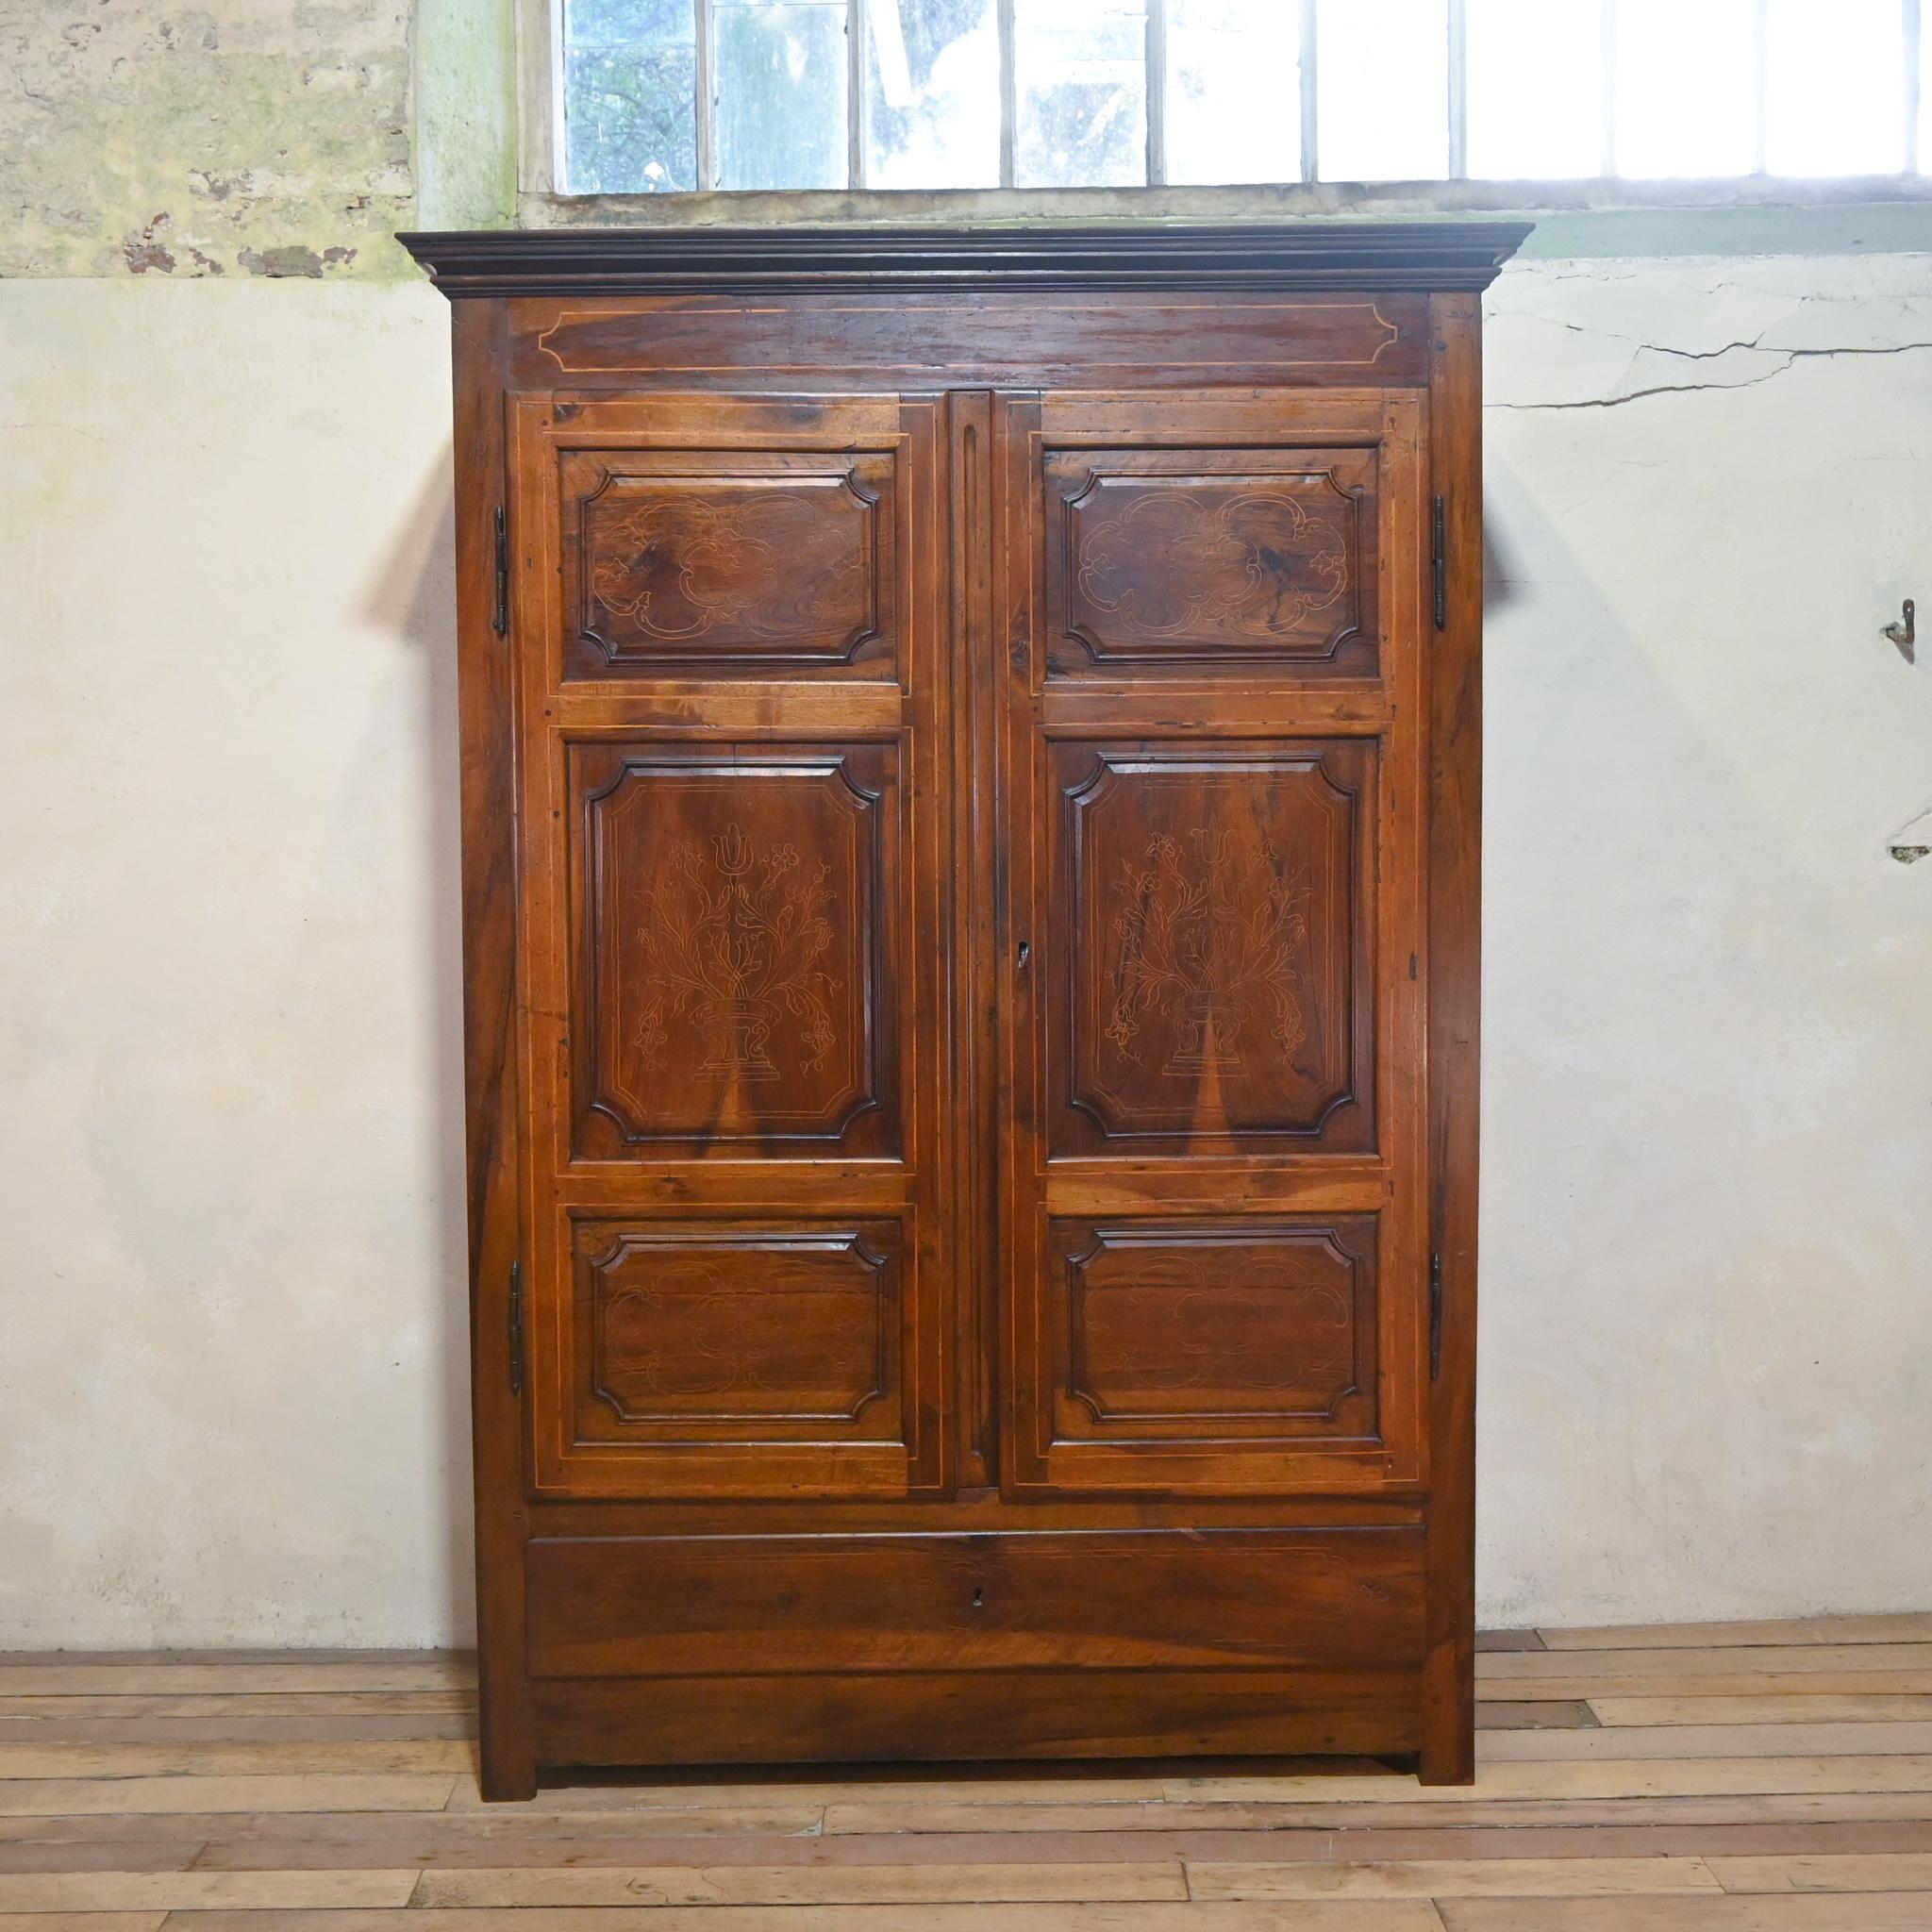 An extraordinary large scale 18th century Spanish walnut armoire from Catalonian. Demonstrating elegant boxwood inlay to the panelled doors and drawer. Displaying a simplistic design with subtle detailing, lending itself to many interiors. The